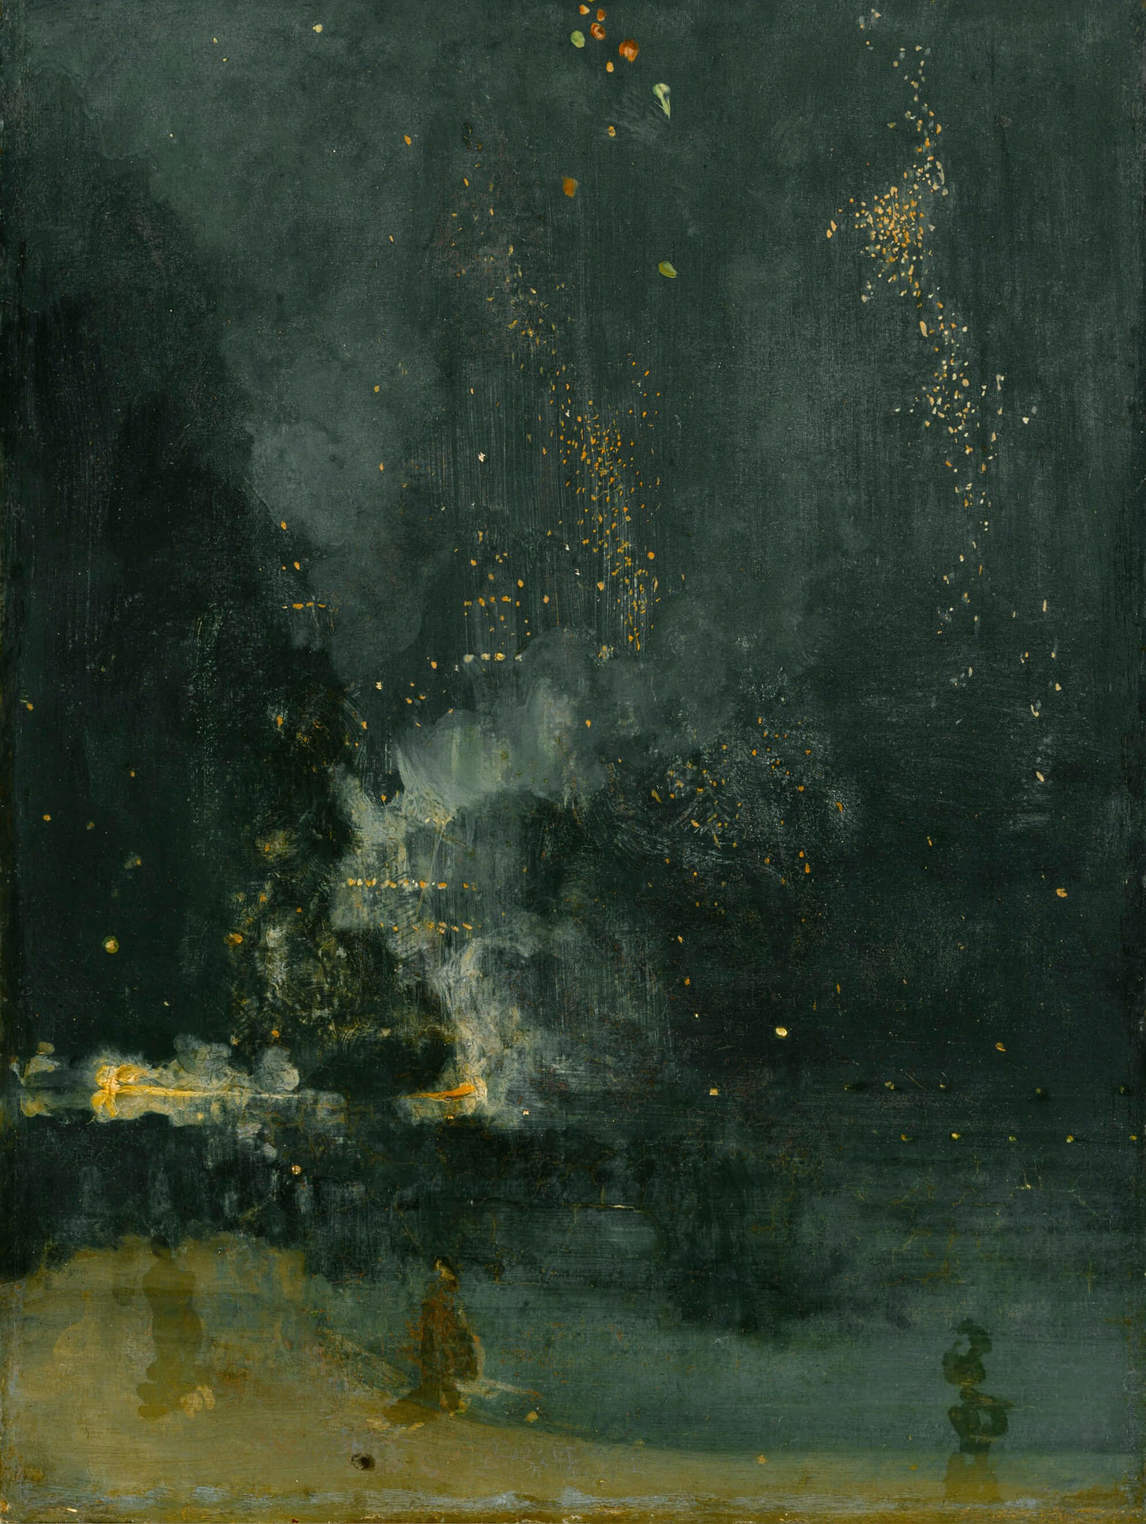  Nocturne in Black and Gold, The Falling Rocket, c.1872–77, by James Abbott McNeil Whistler